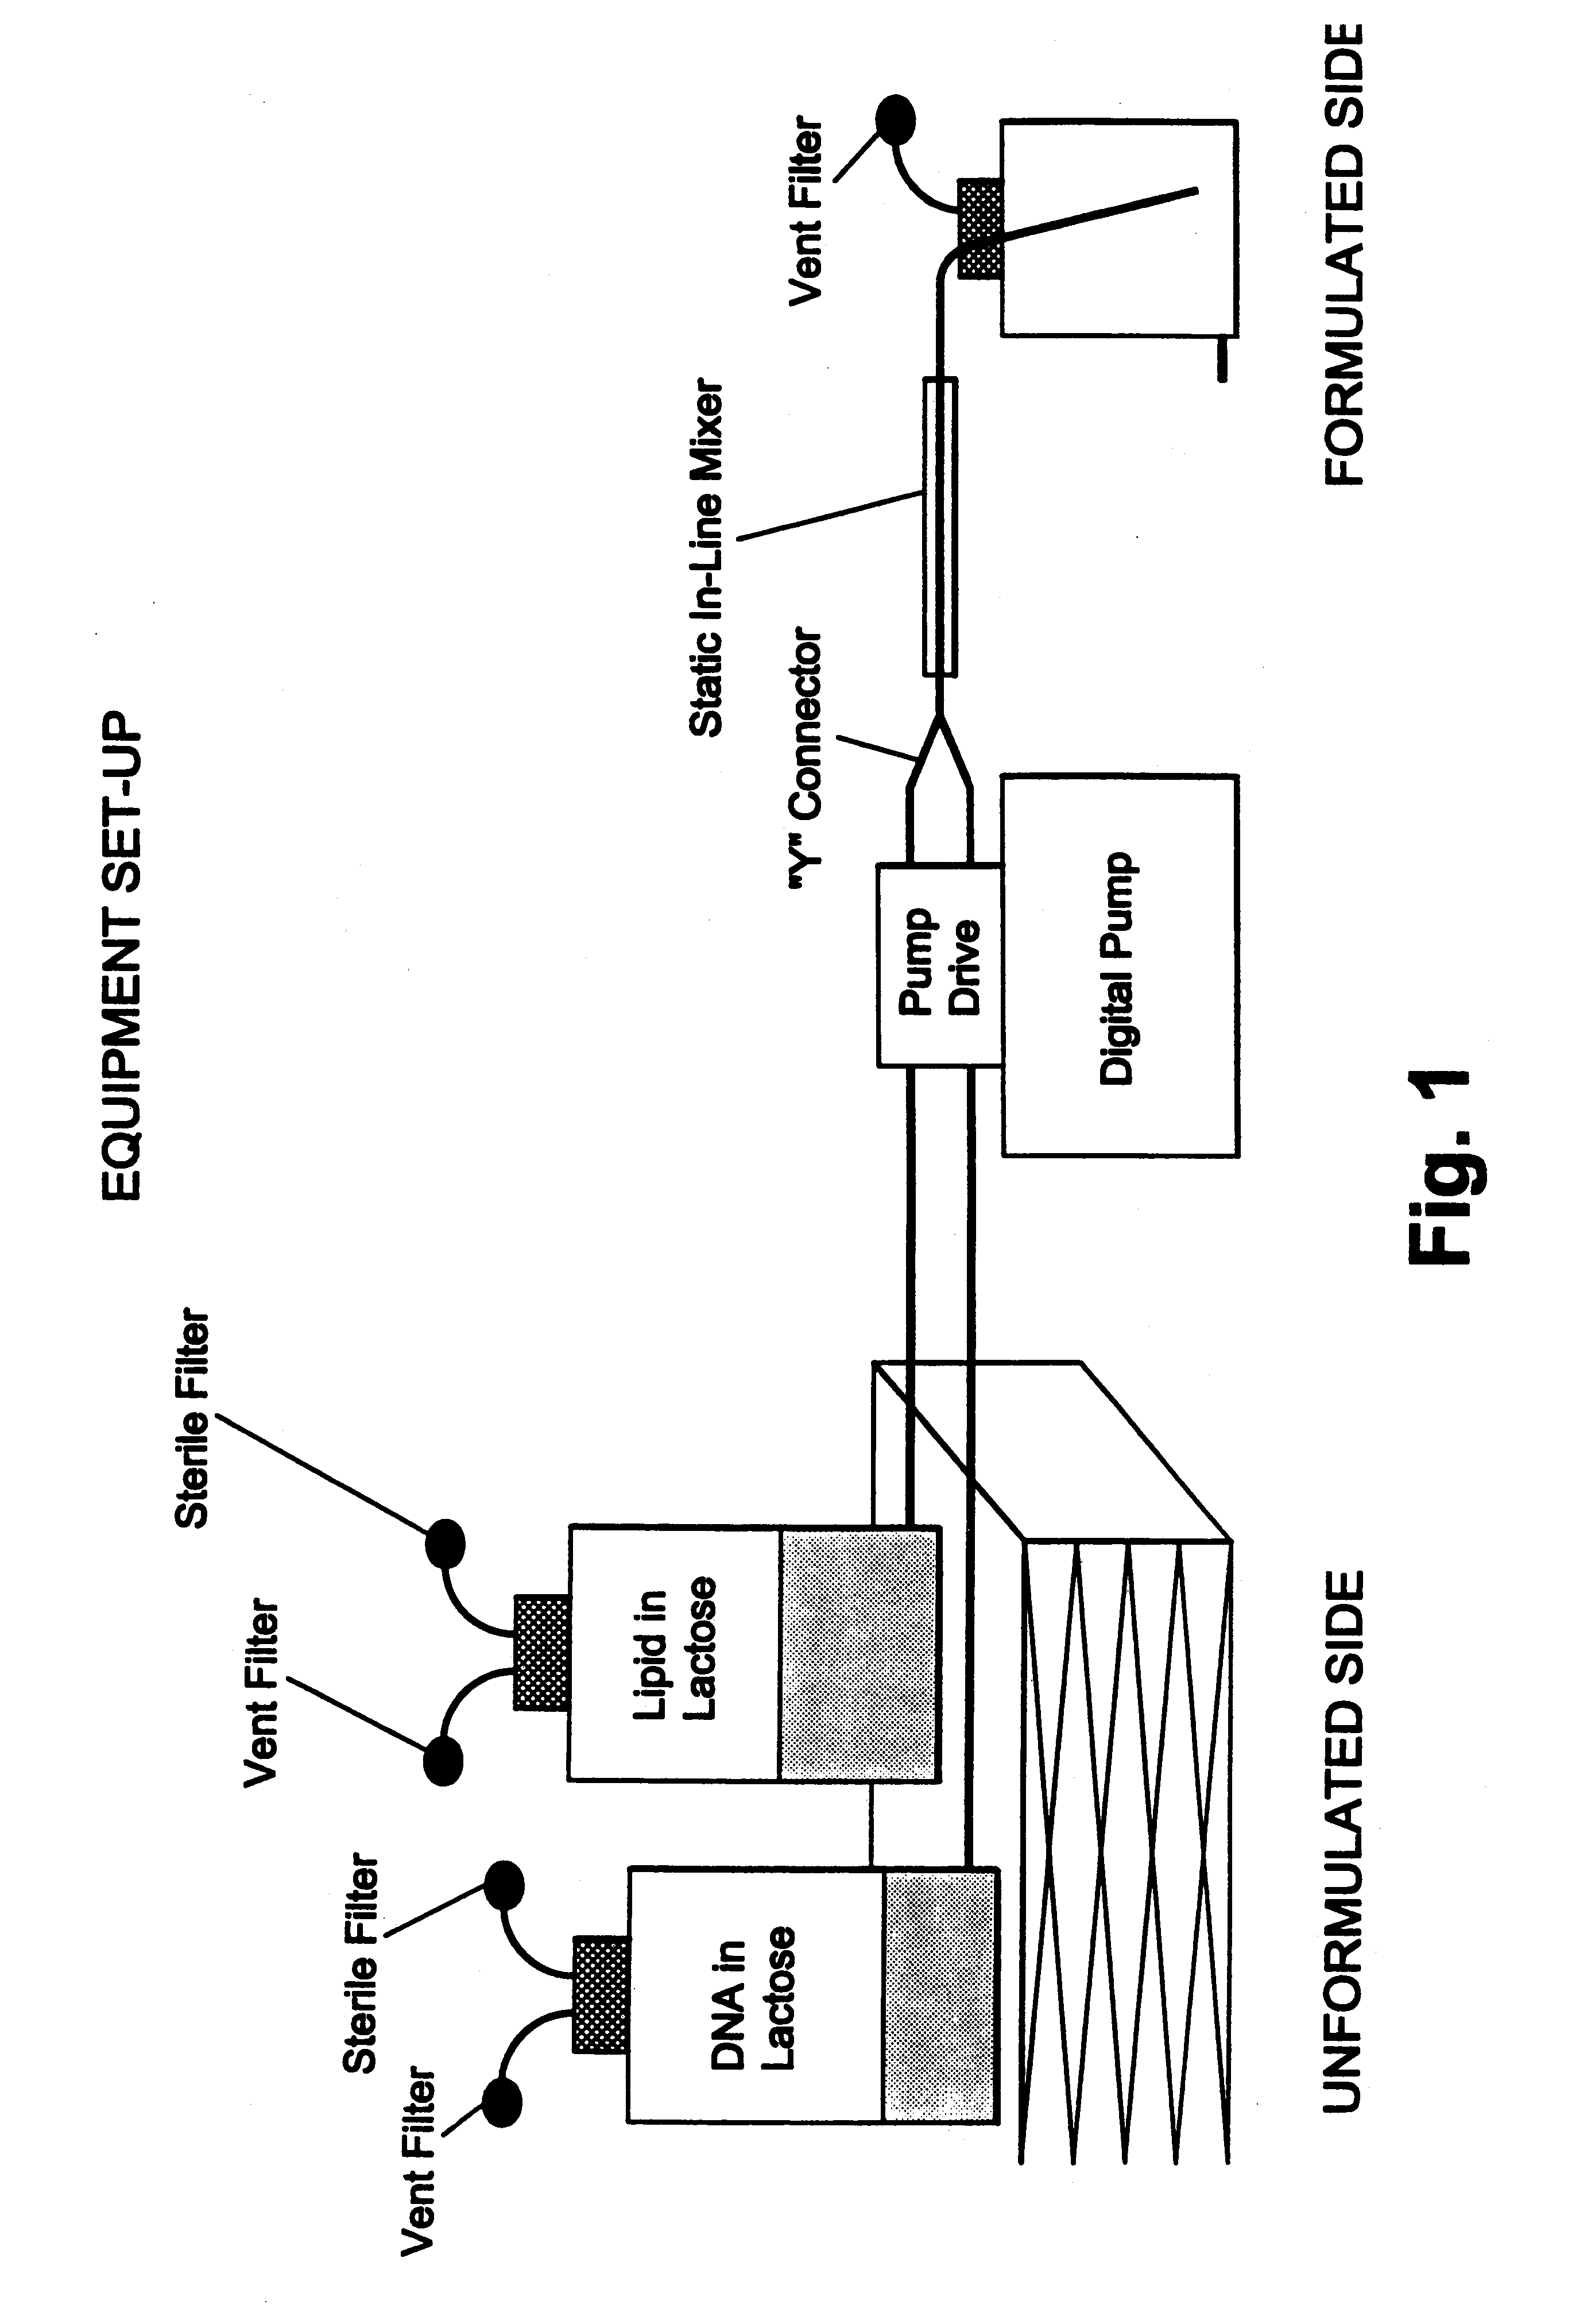 Protected one-vial formulation for nucleic acid molecules, methods of making the same by in-line mixing, and related products and methods